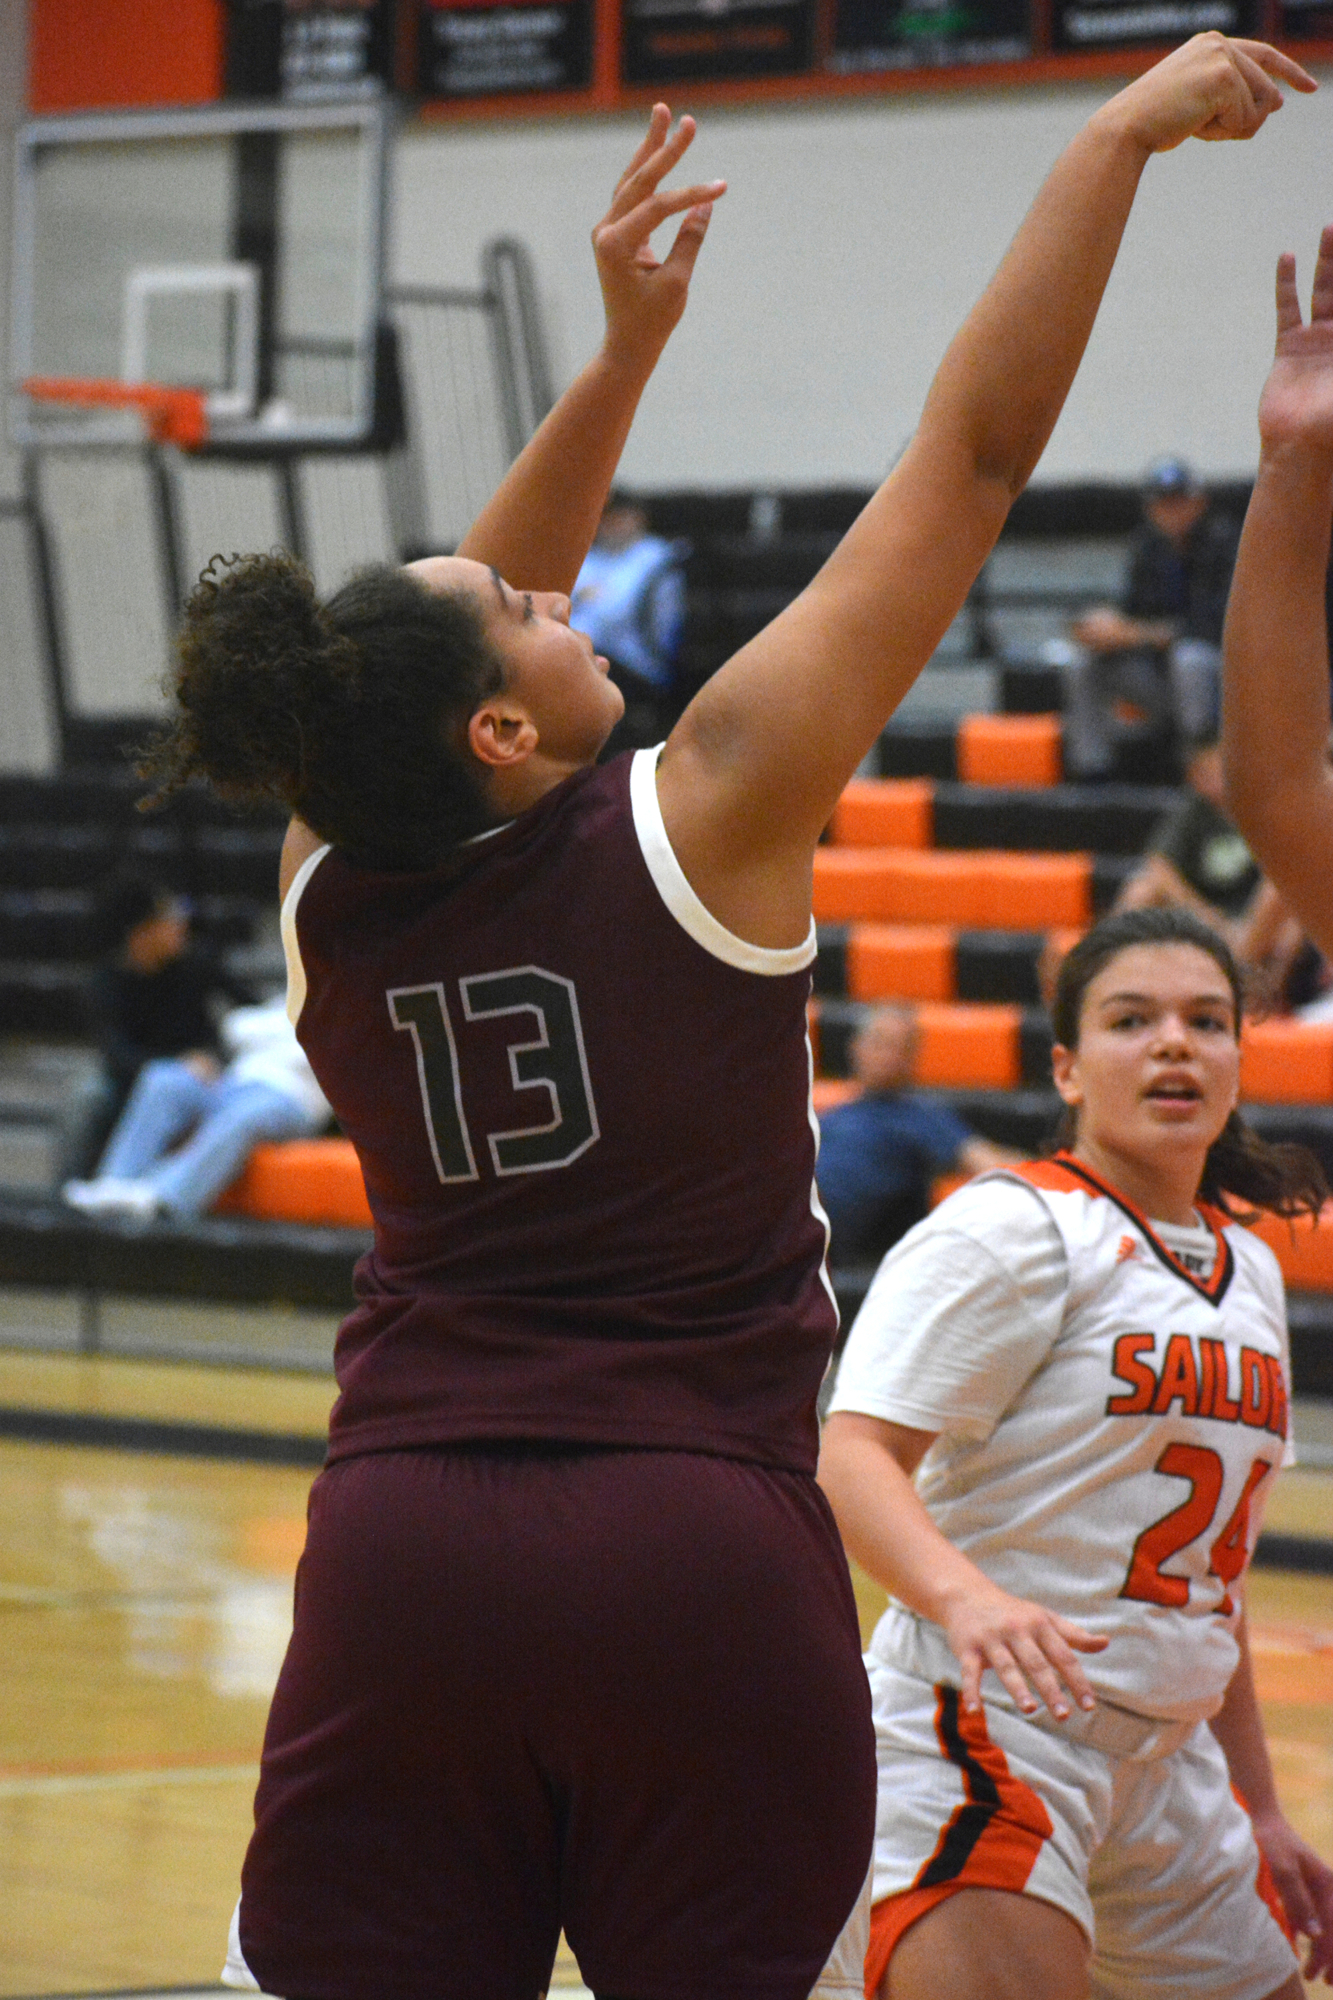 Senior forward Bella Patterson hits a jump shot against Sarasota High. Patterson is one of the team's go-to offensive players in 2021. She scored 20 points against the Sailors.